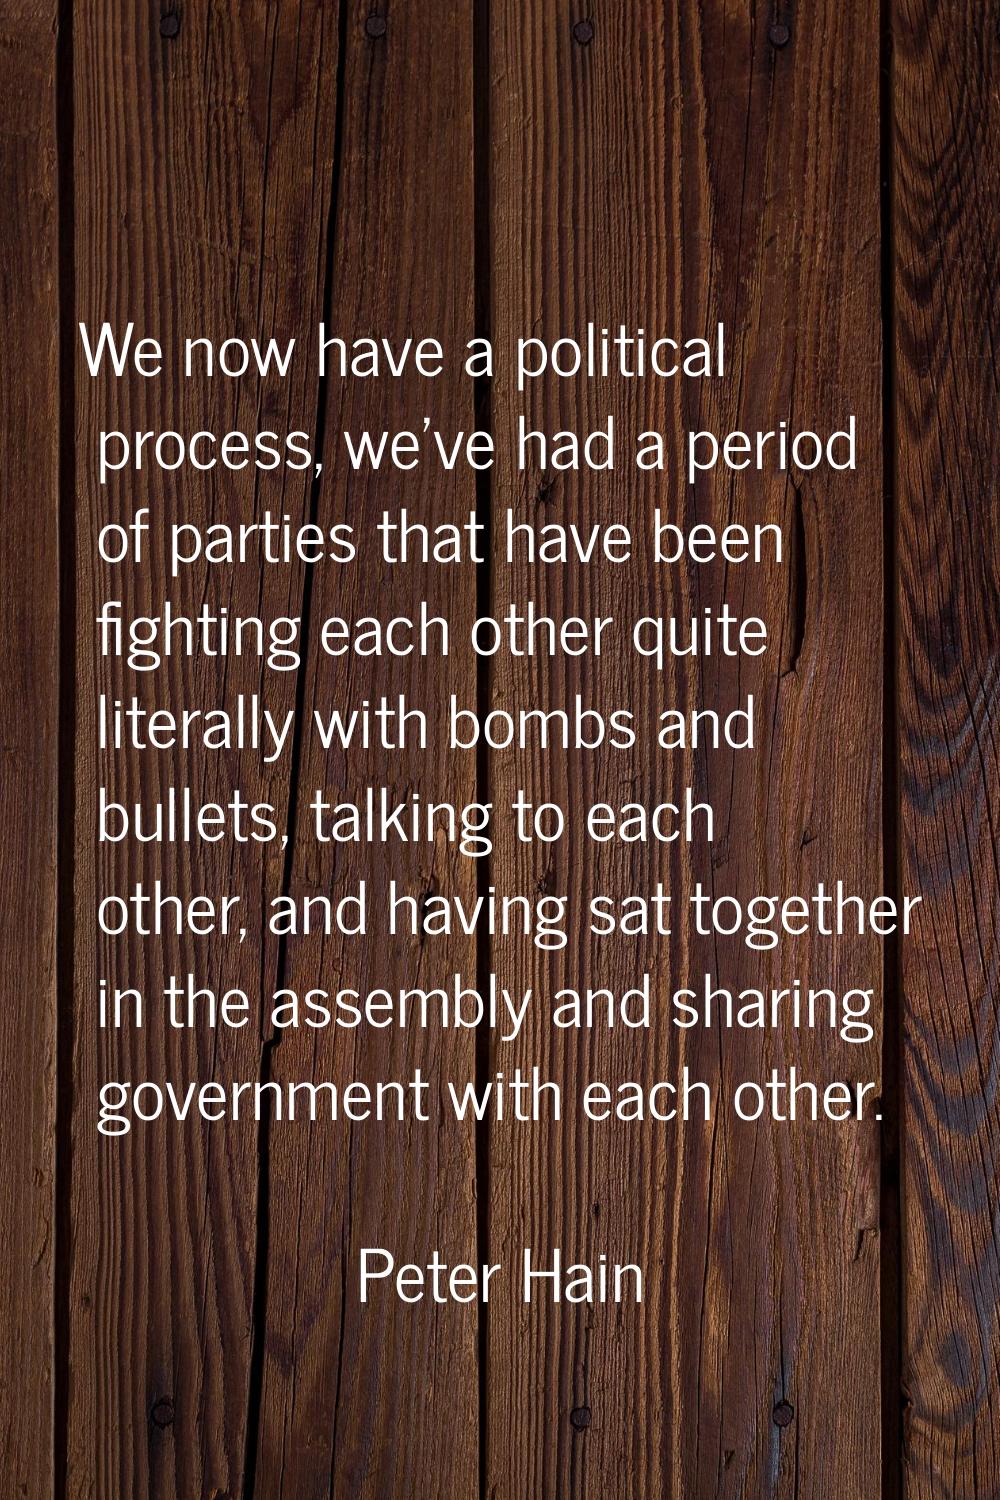 We now have a political process, we've had a period of parties that have been fighting each other q